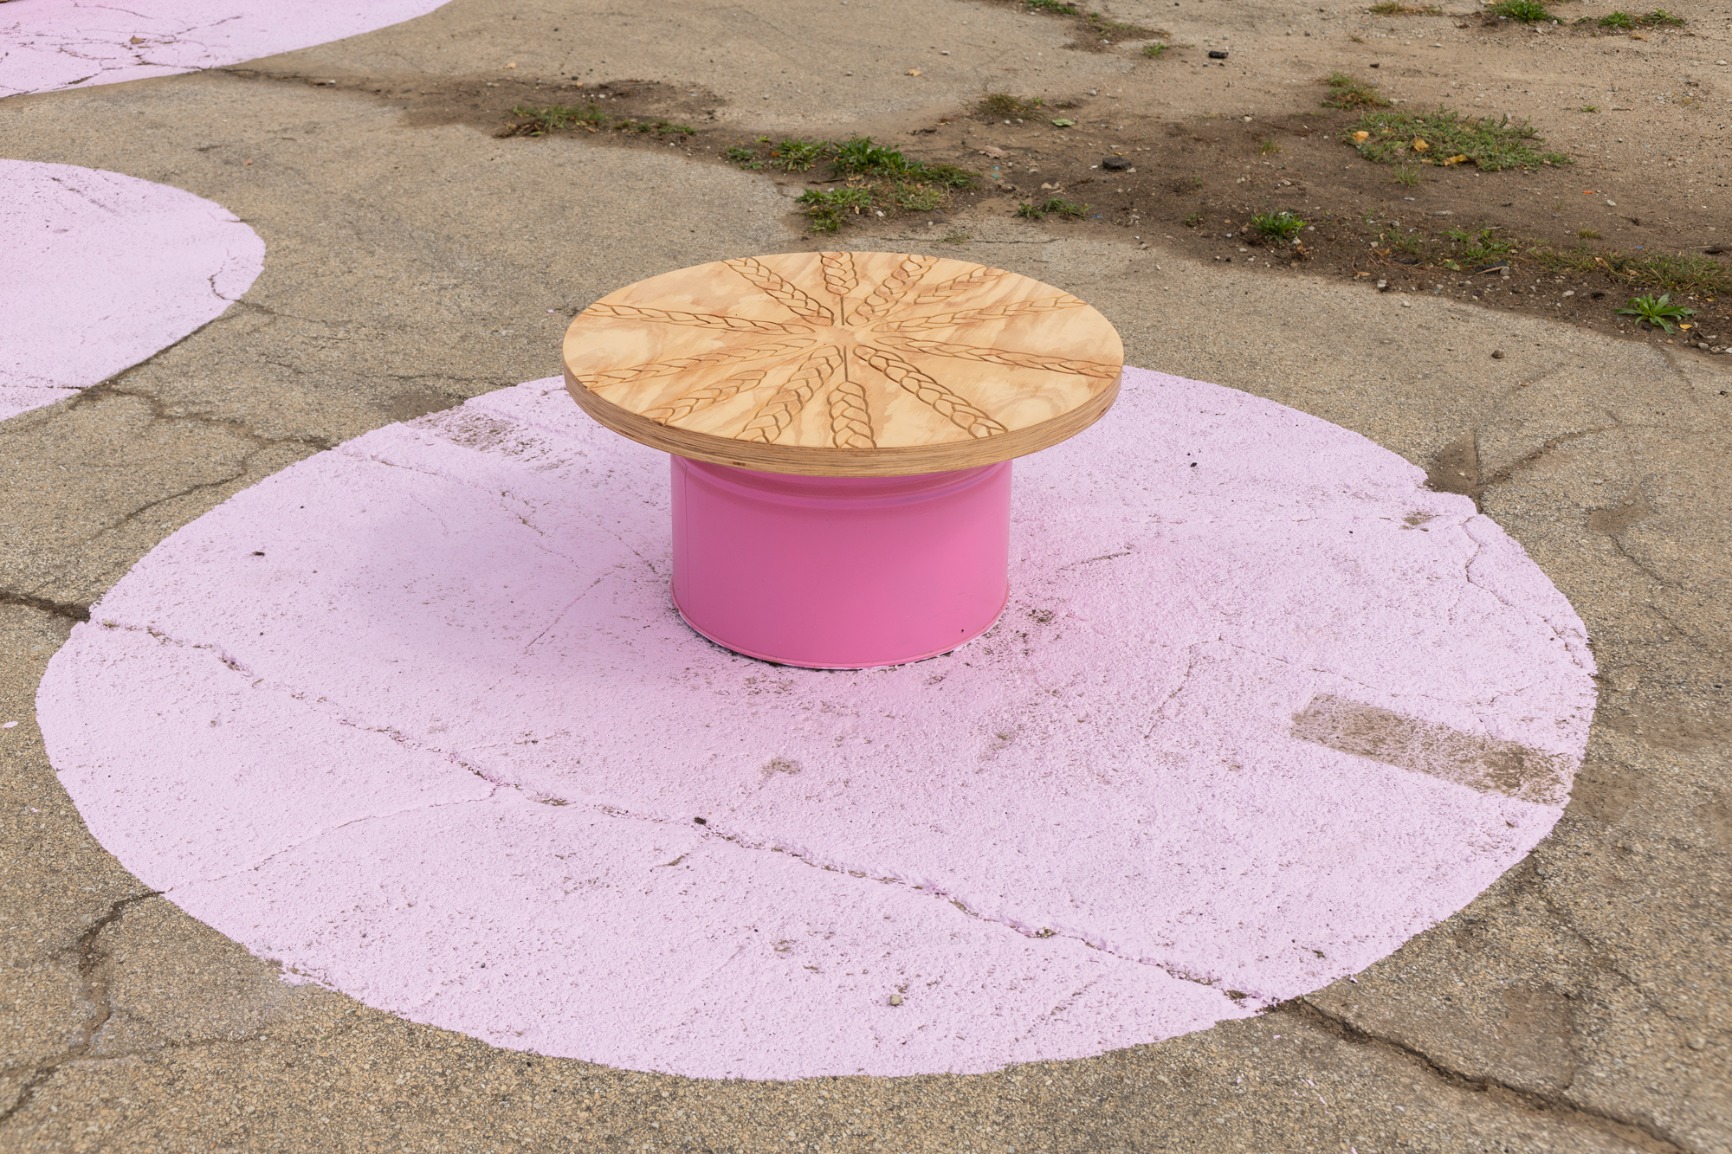 Photo showing part of pavilion. Pink benches with timber tops. The timber has engravings of braid patterns. The ground is concrete with pink circles painted onto it where a bench appears.